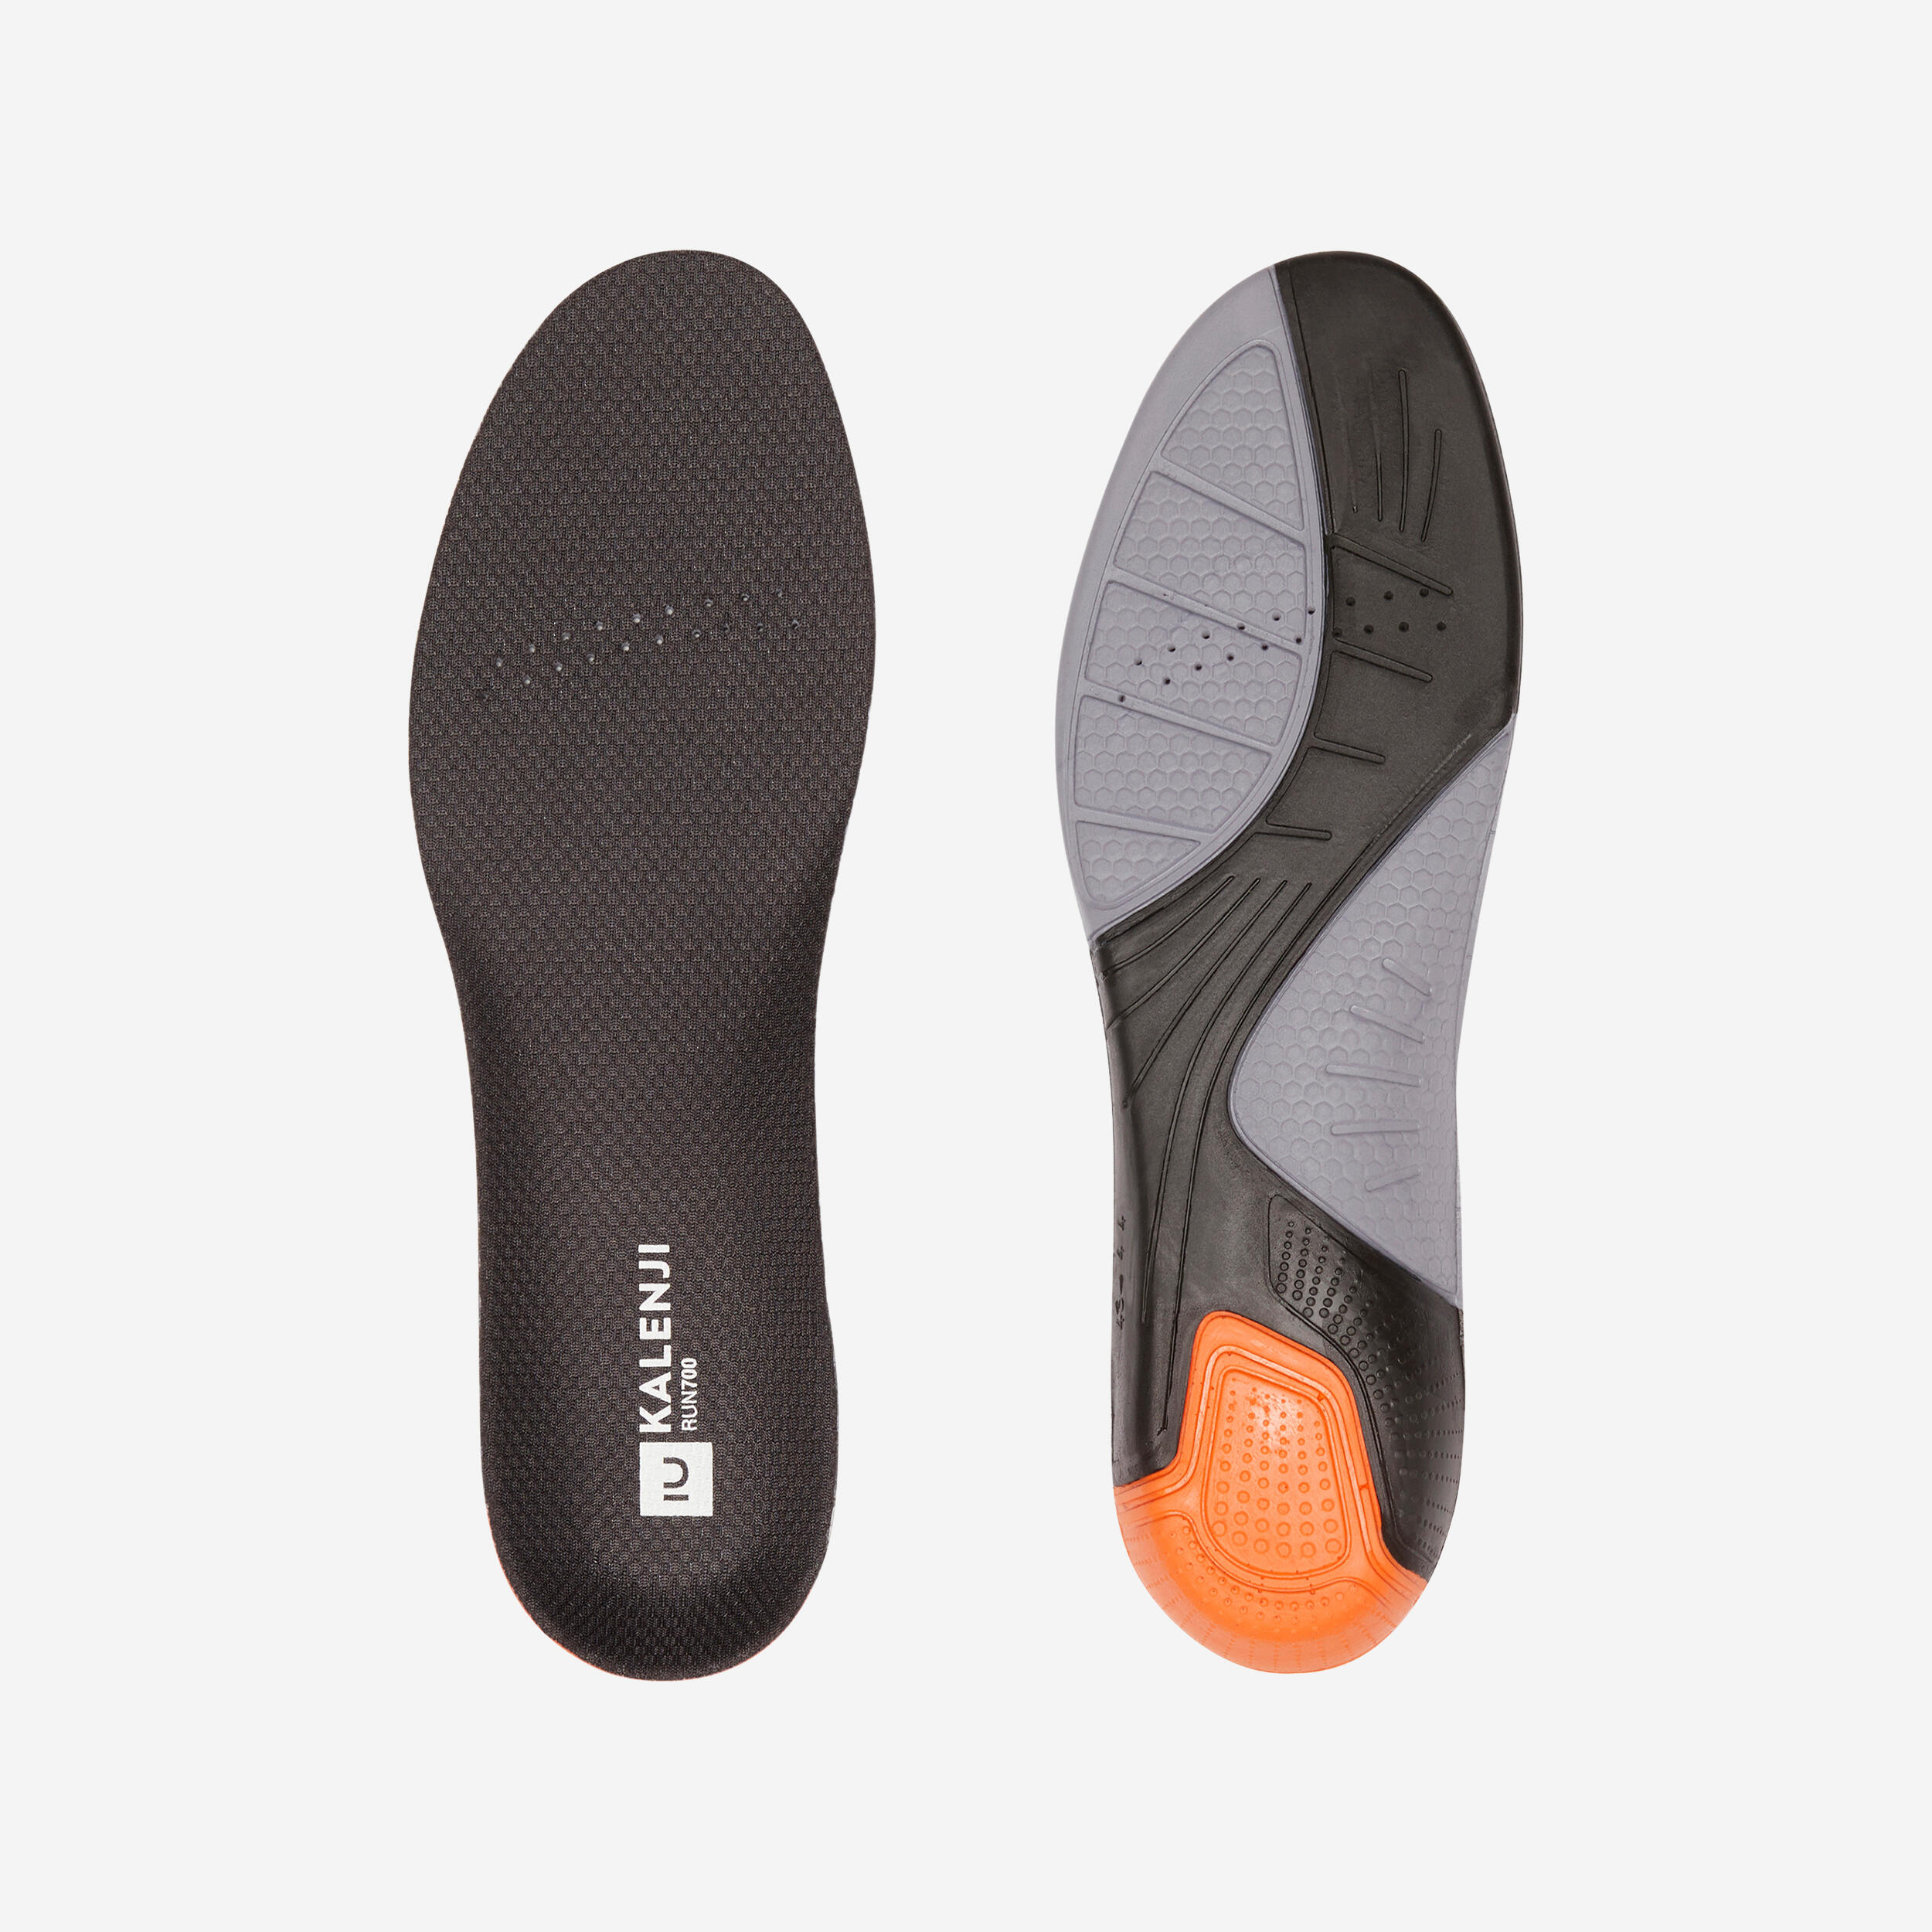 R700 insoles 1/4